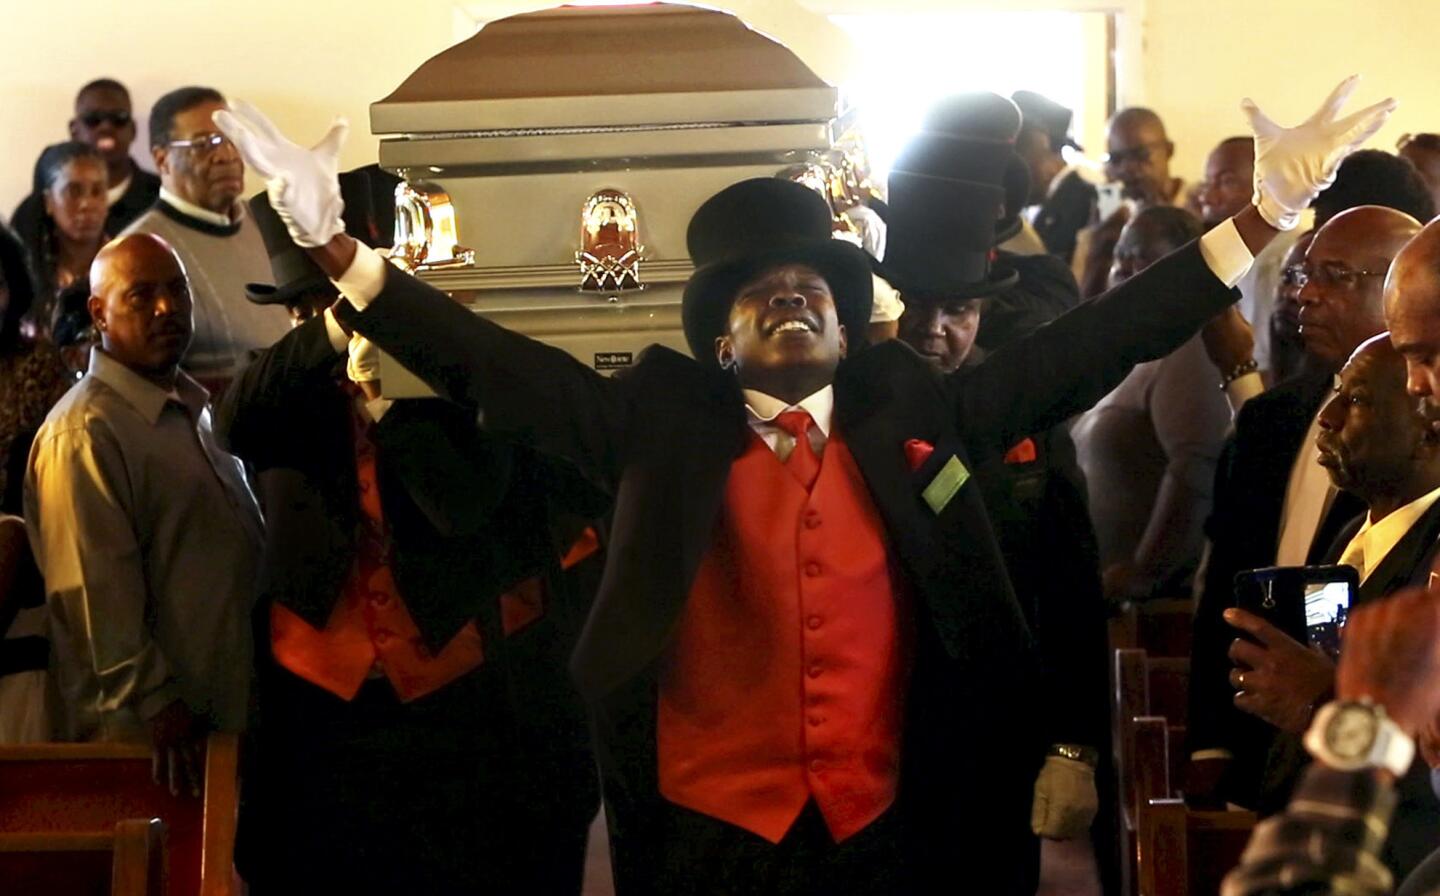 Professional pallbearer Marteze Gilmore leads his colleagues into the church as they bear the casket shoulder-high at a funeral service in South Los Angeles.